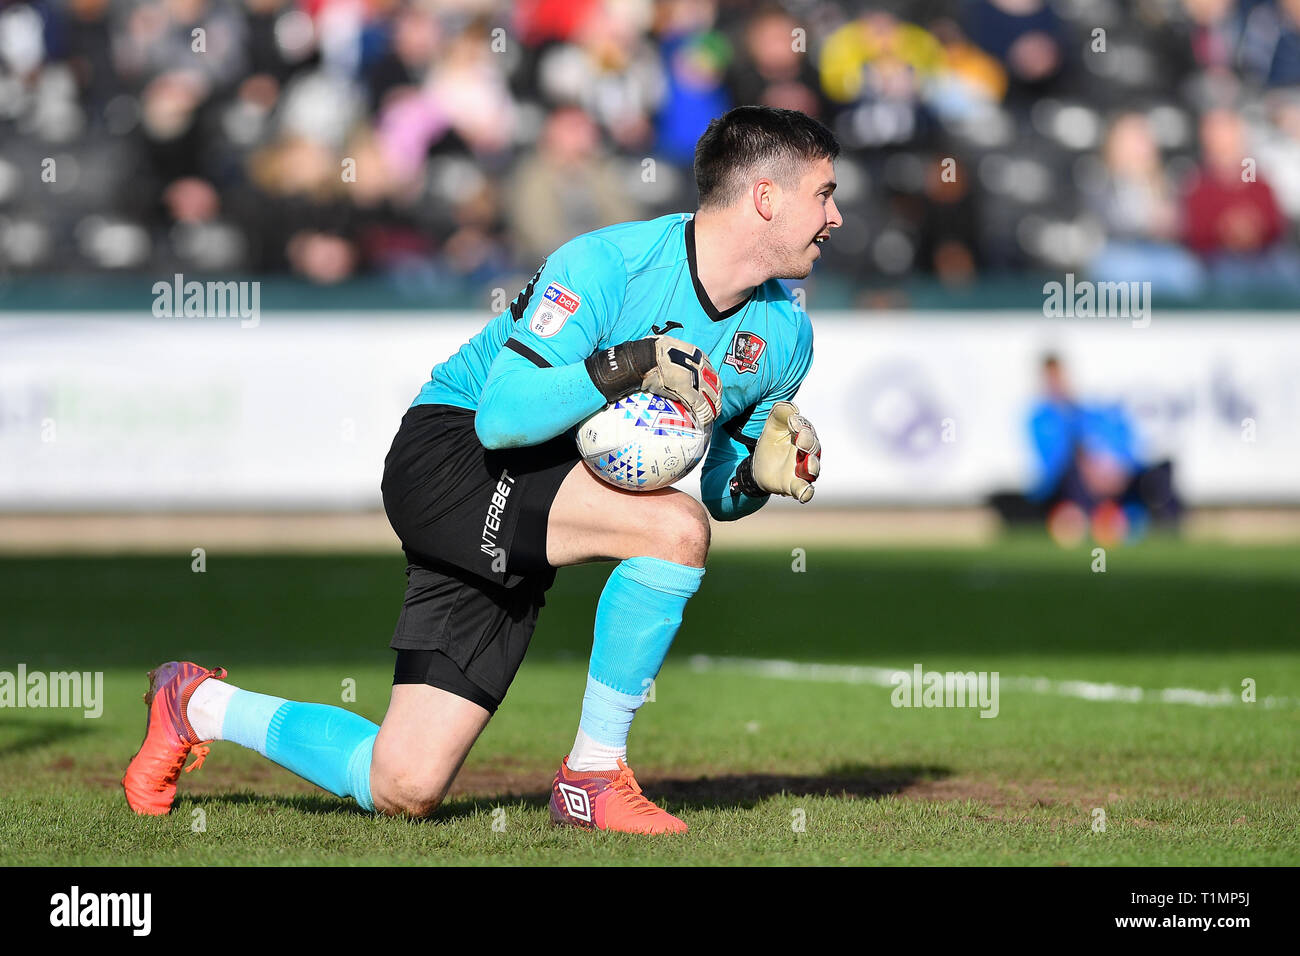 23rd March 2019 , Meadow Lane, Nottingham, England; Sky Bet League Two, Notts County vs Exeter City ; Christy Pym (1) of Exeter City   Credit Jon Hobley/News Images Stock Photo